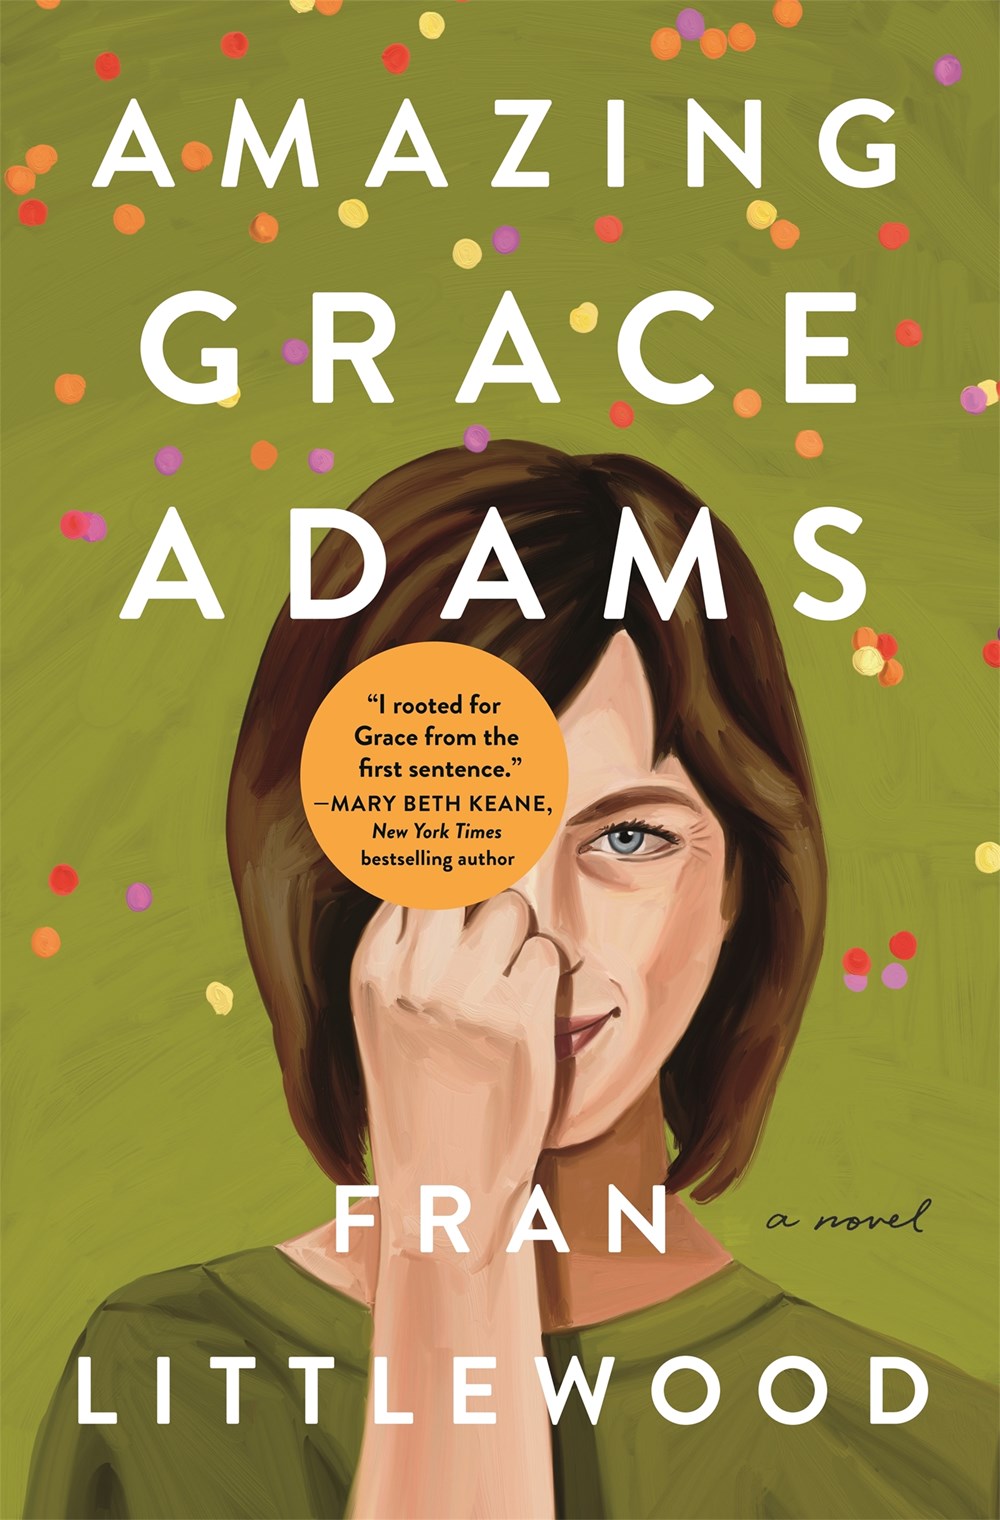 Debut Book Review: Amazing Grace Adams by Fran Littlewood